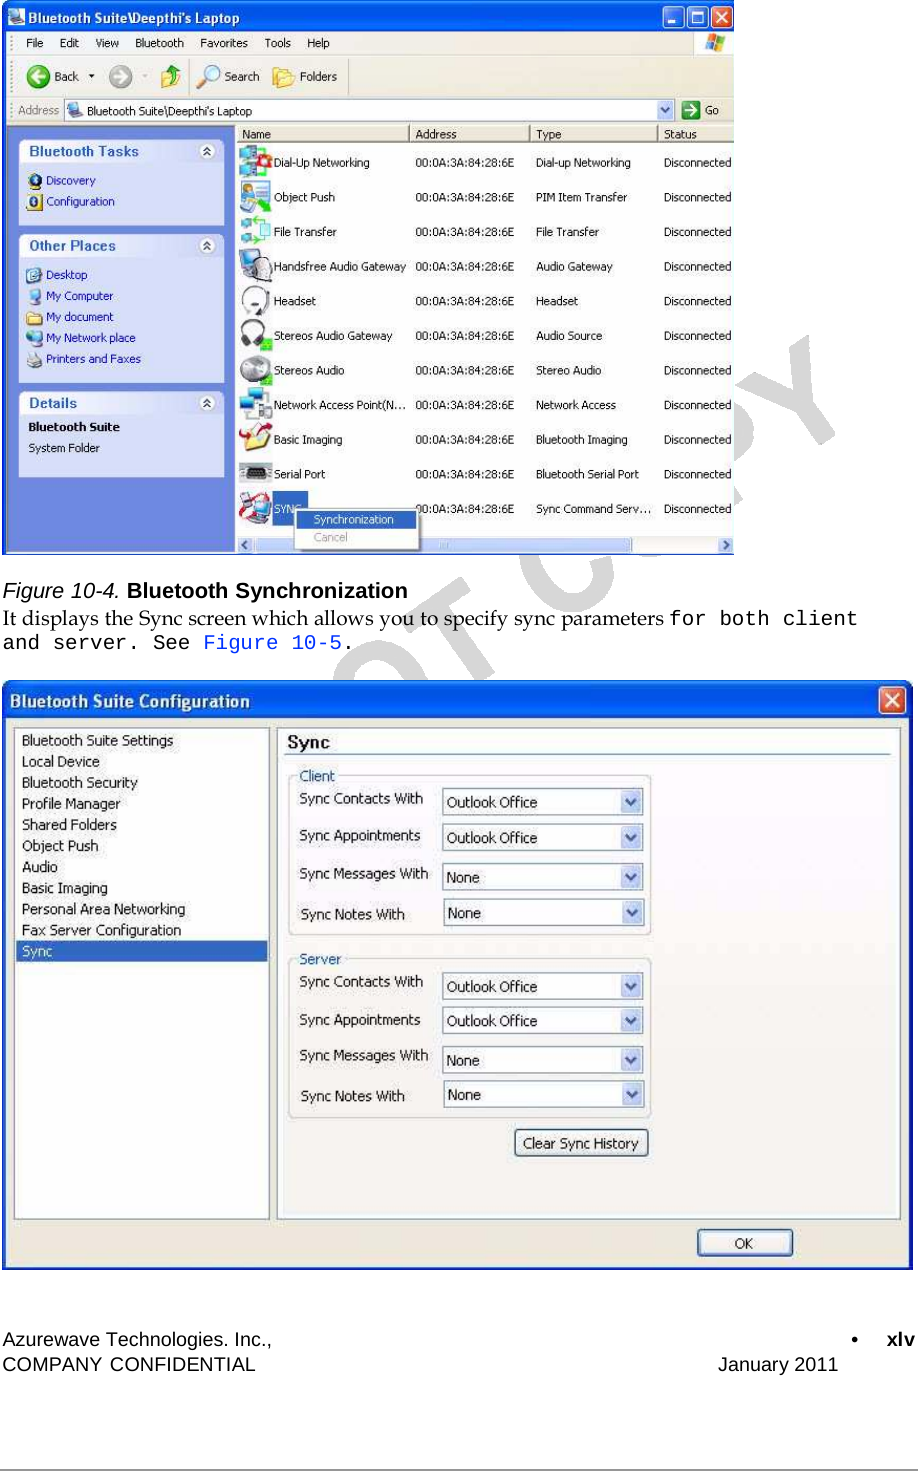                         Figure 10-4. Bluetooth Synchronization It displays the Sync screen which allows you to specify sync parameters for both client and server. See Figure 10-5.                                 Azurewave Technologies. Inc.,  •  xlv COMPANY CONFIDENTIAL   January 2011 